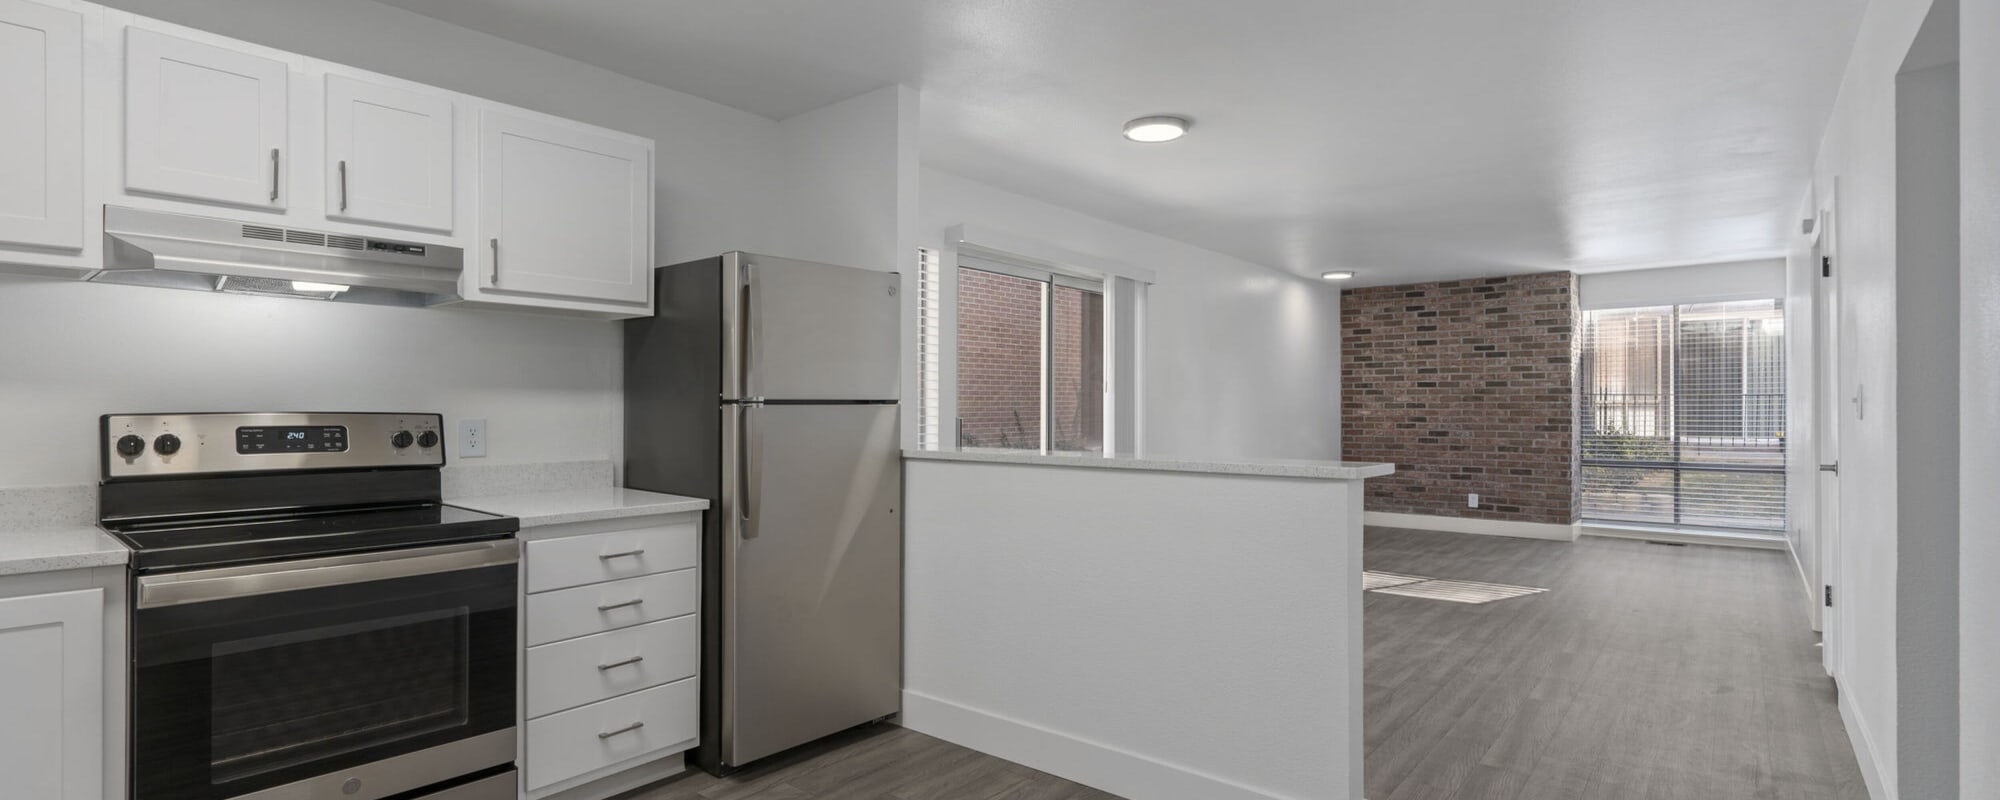 Model kitchen leading to living space at The Franklyn Apartments in Millcreek, Utah